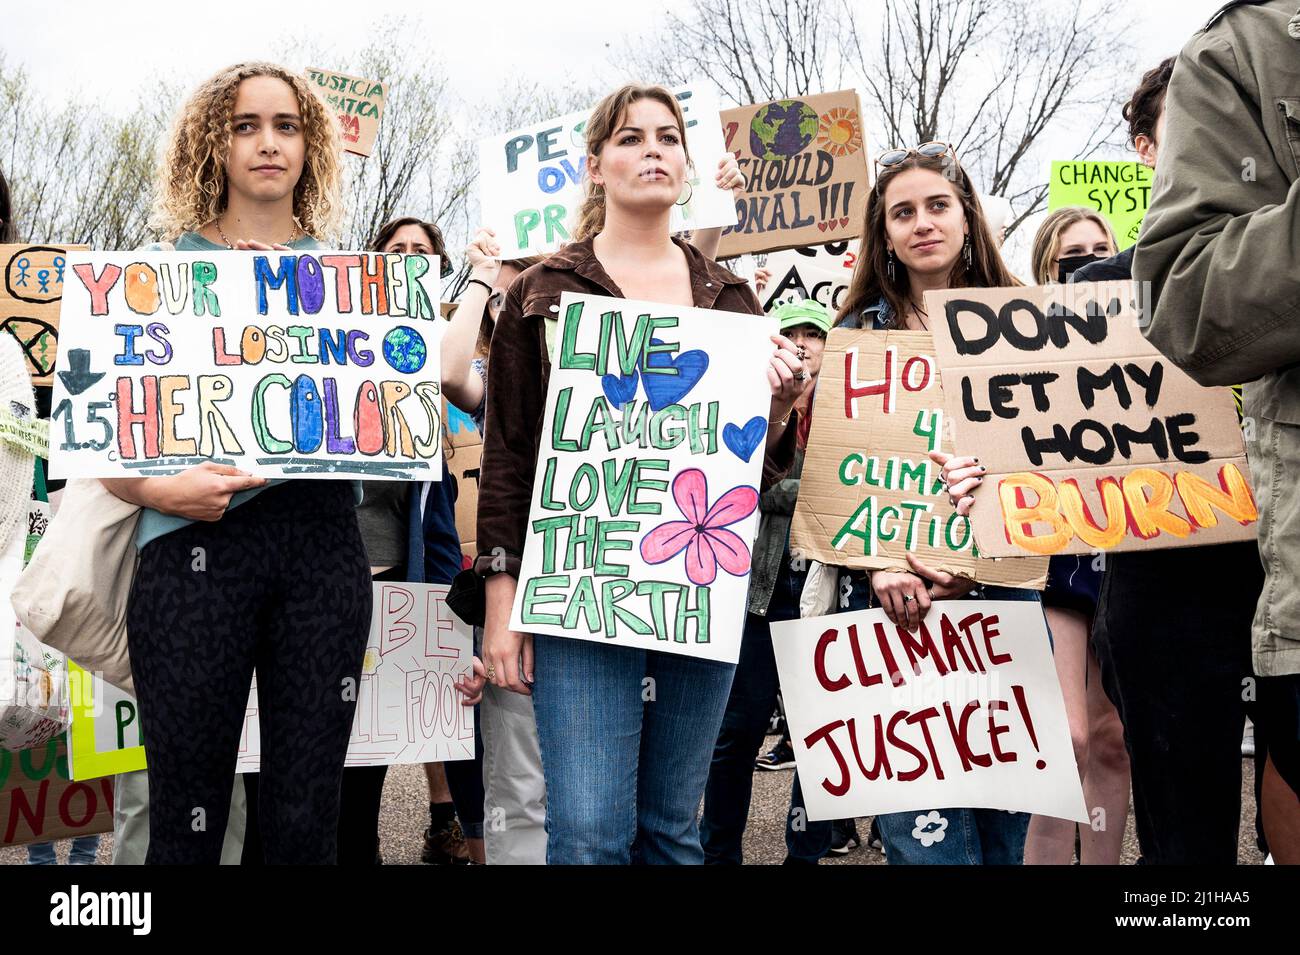 Washington, DC, USA. 25th Mar, 2022. March 25, 2022 - Washington, DC, United States: Women holding signs saying ''Your mother is losing her colors'', ''Live laugh love the earth'' and ''Don't burn my home'' at a Global Climate Strike demonstration. (Credit Image: © Michael Brochstein/ZUMA Press Wire) Stock Photo